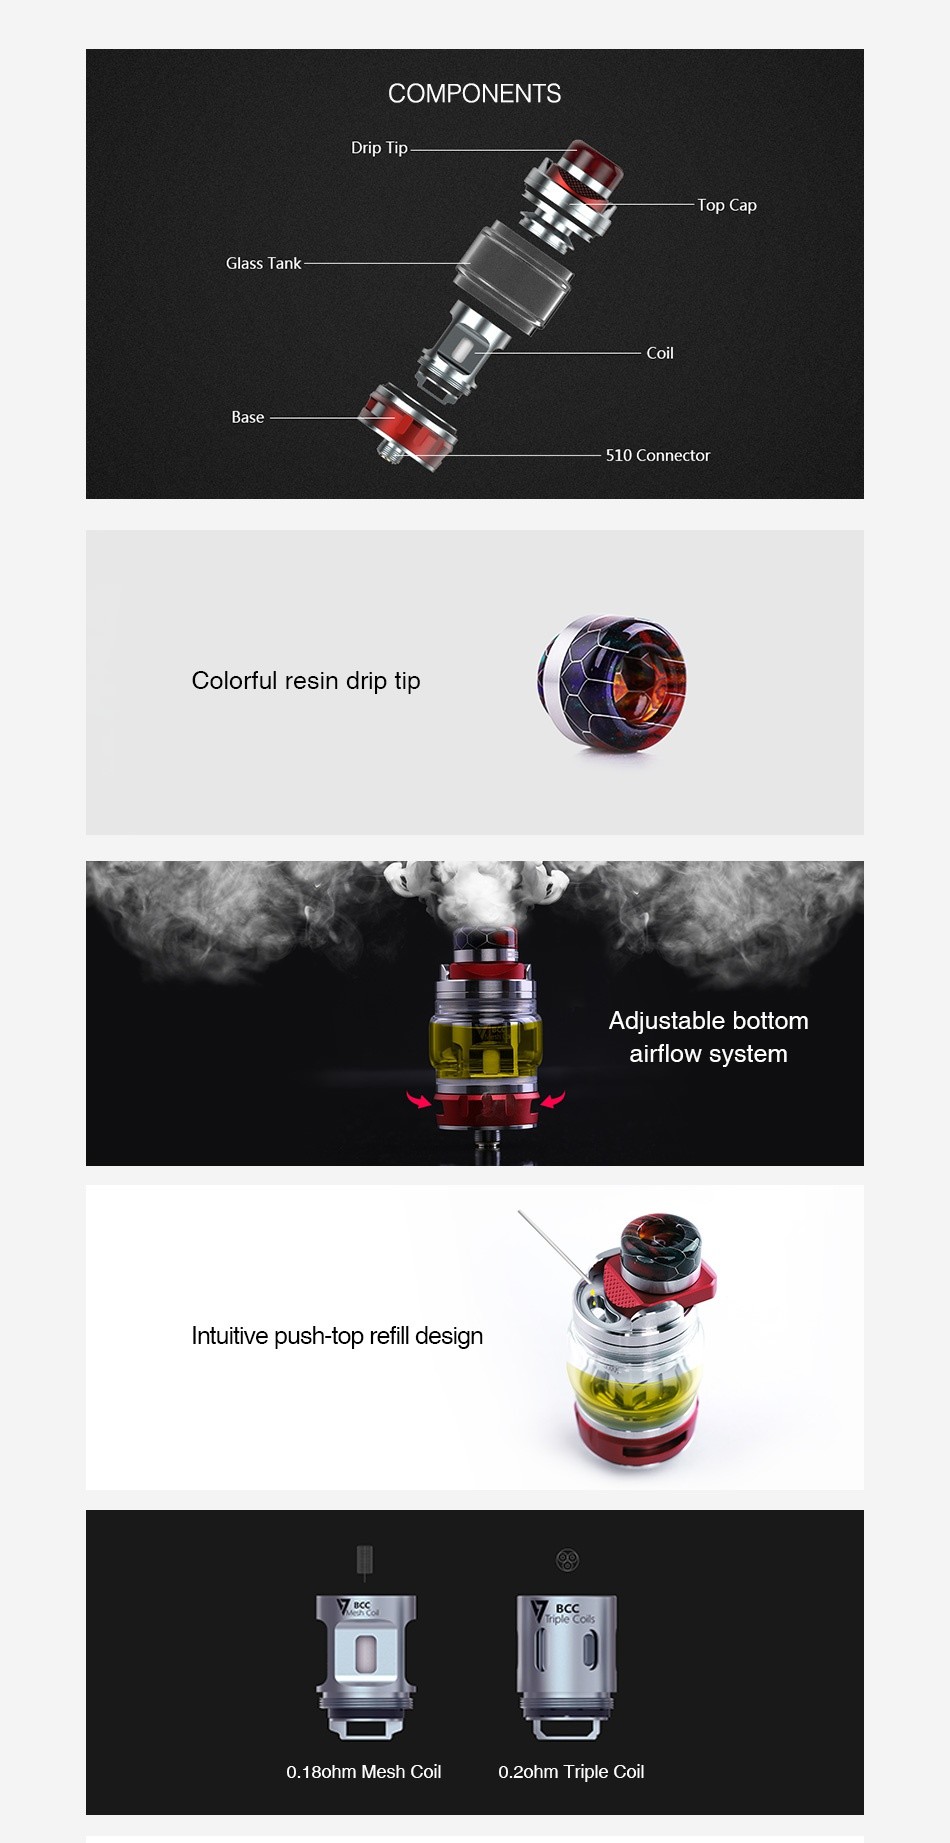 Desire Bulldog Subohm Tank 4.3ml COMPONENTS Ip Ip  Glass Tank Coil 510 Connector Colorful resin drip tip Adjustable bottom airflow system Intuitive push top refill design 0 18ohm Mesh co 0  ohm I riple Coll